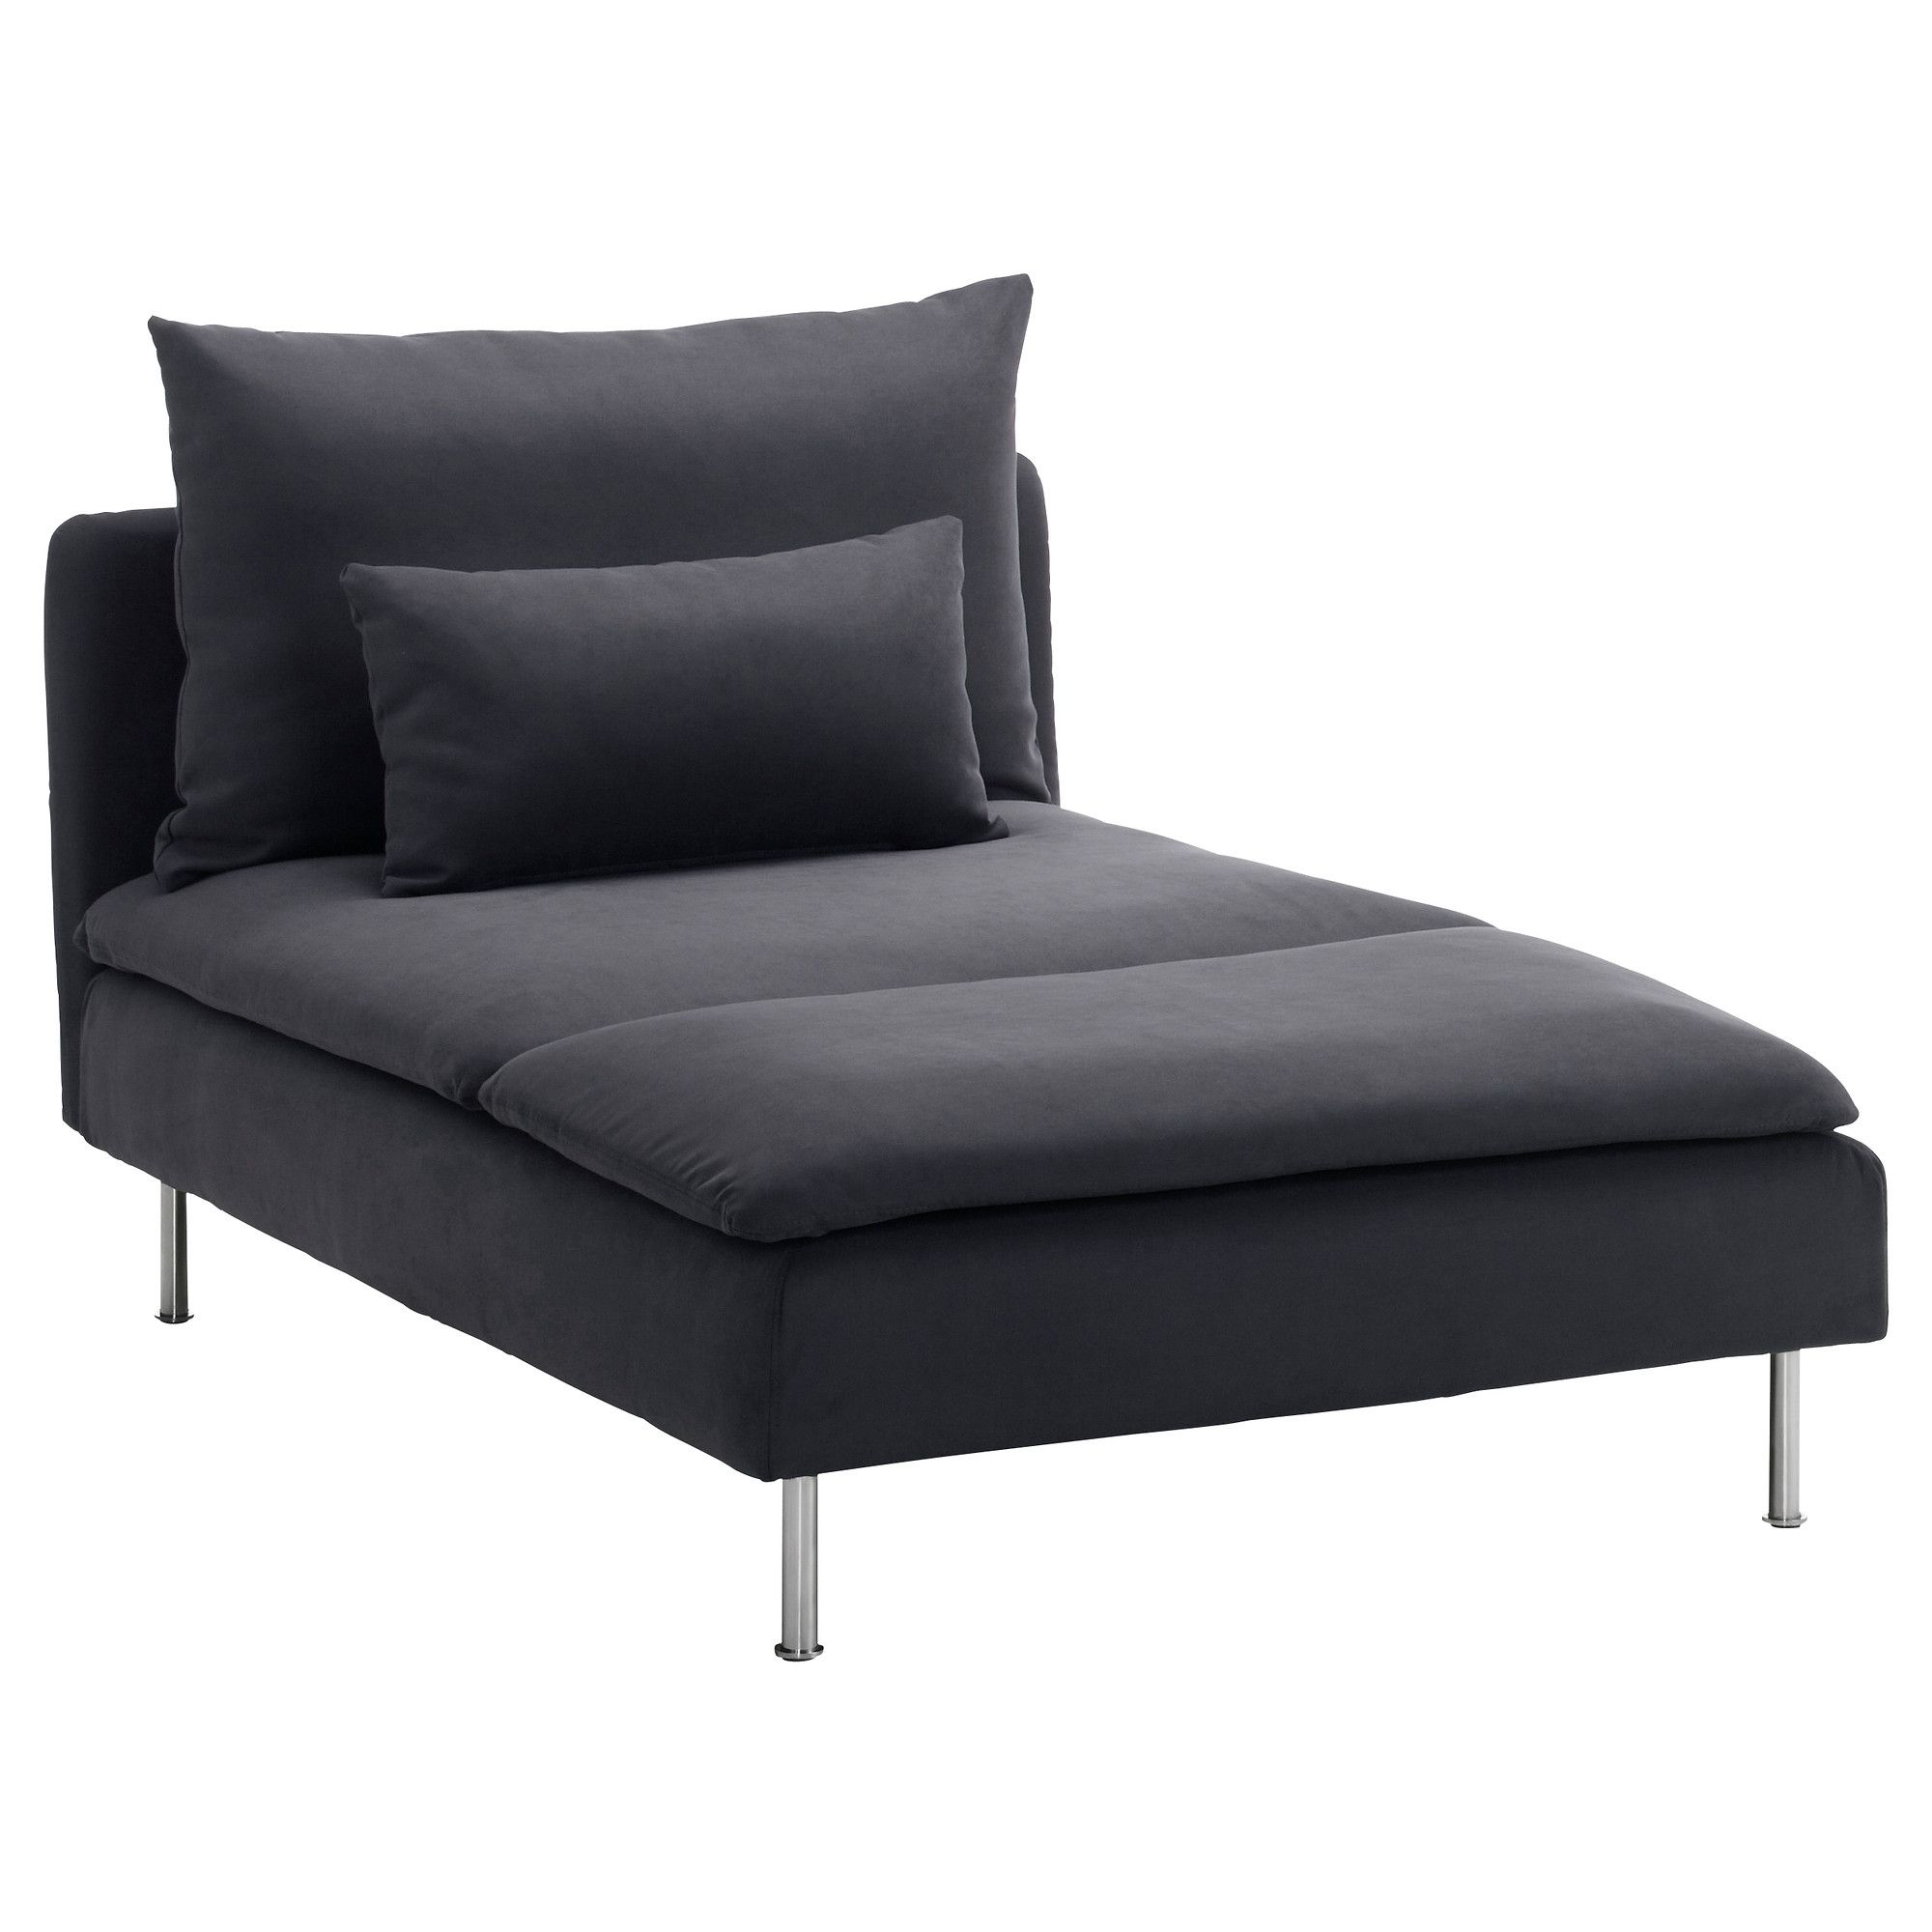 Widely Used Gray Chaises In Söderhamn Chaise – Samsta Dark Gray – Ikea (View 4 of 15)